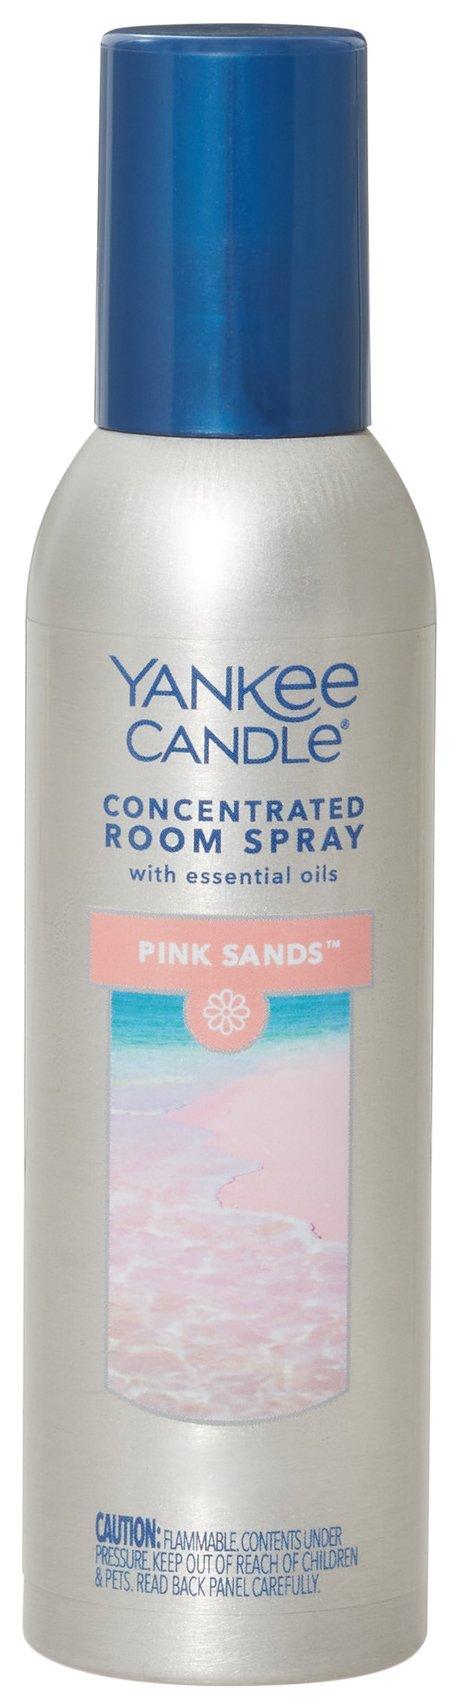 Pink Sands Concentrated Room Spray